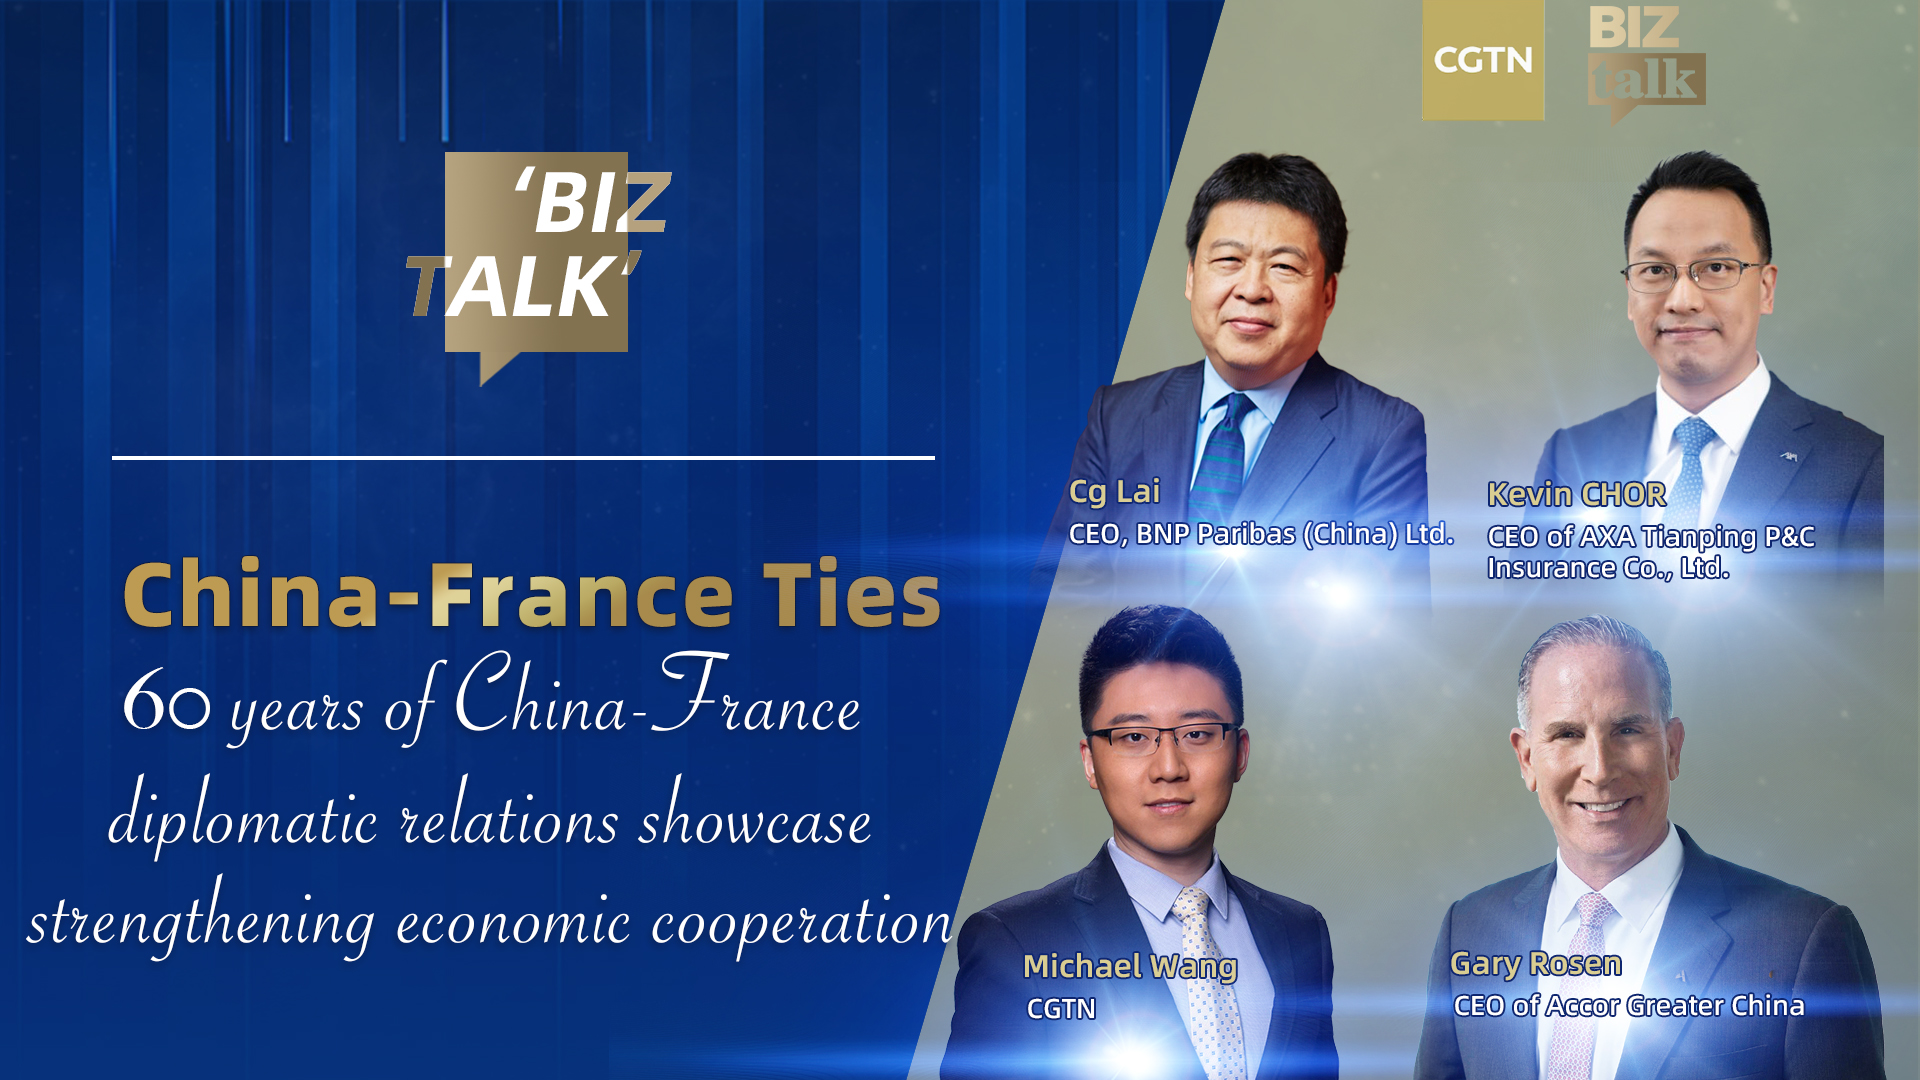 Watch: China-France relations boost economic ties in 60 years